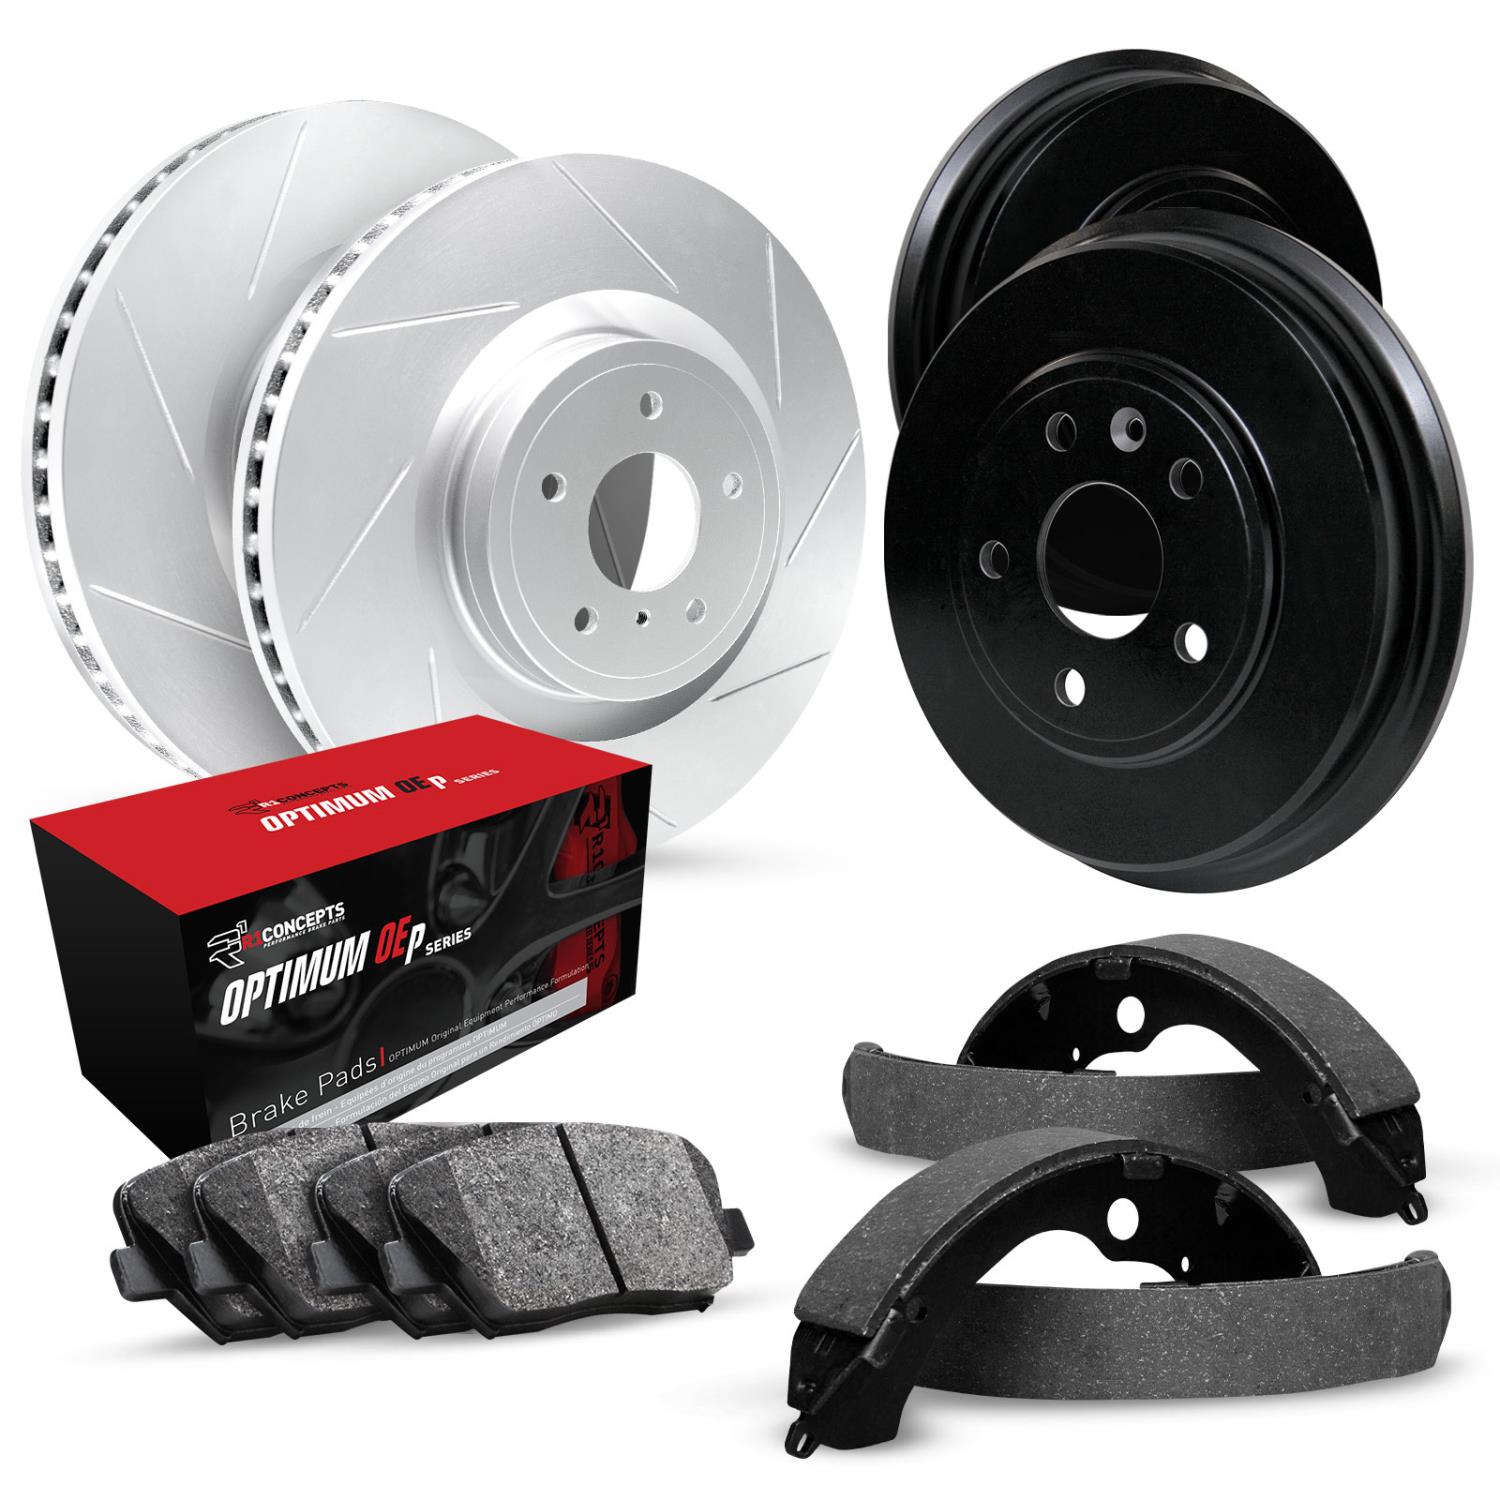 GEO-Carbon Slotted Brake Rotor & Drum Set w/Optimum OE Pads & Shoes, 1986-1990 GM, Position: Front & Rear